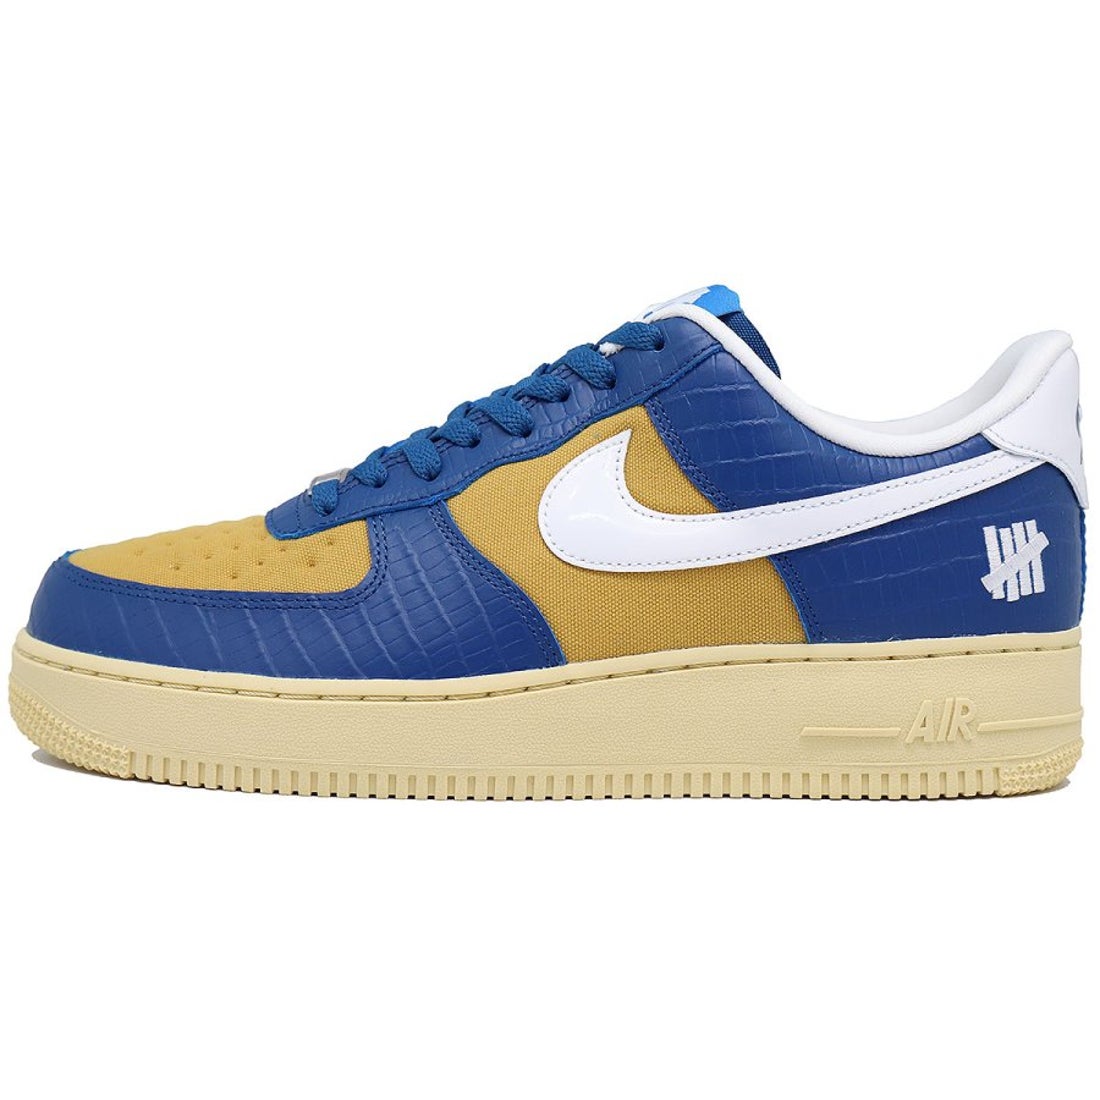 UNDEFEATED × NIKE AIR FORCE 1 LOW SP